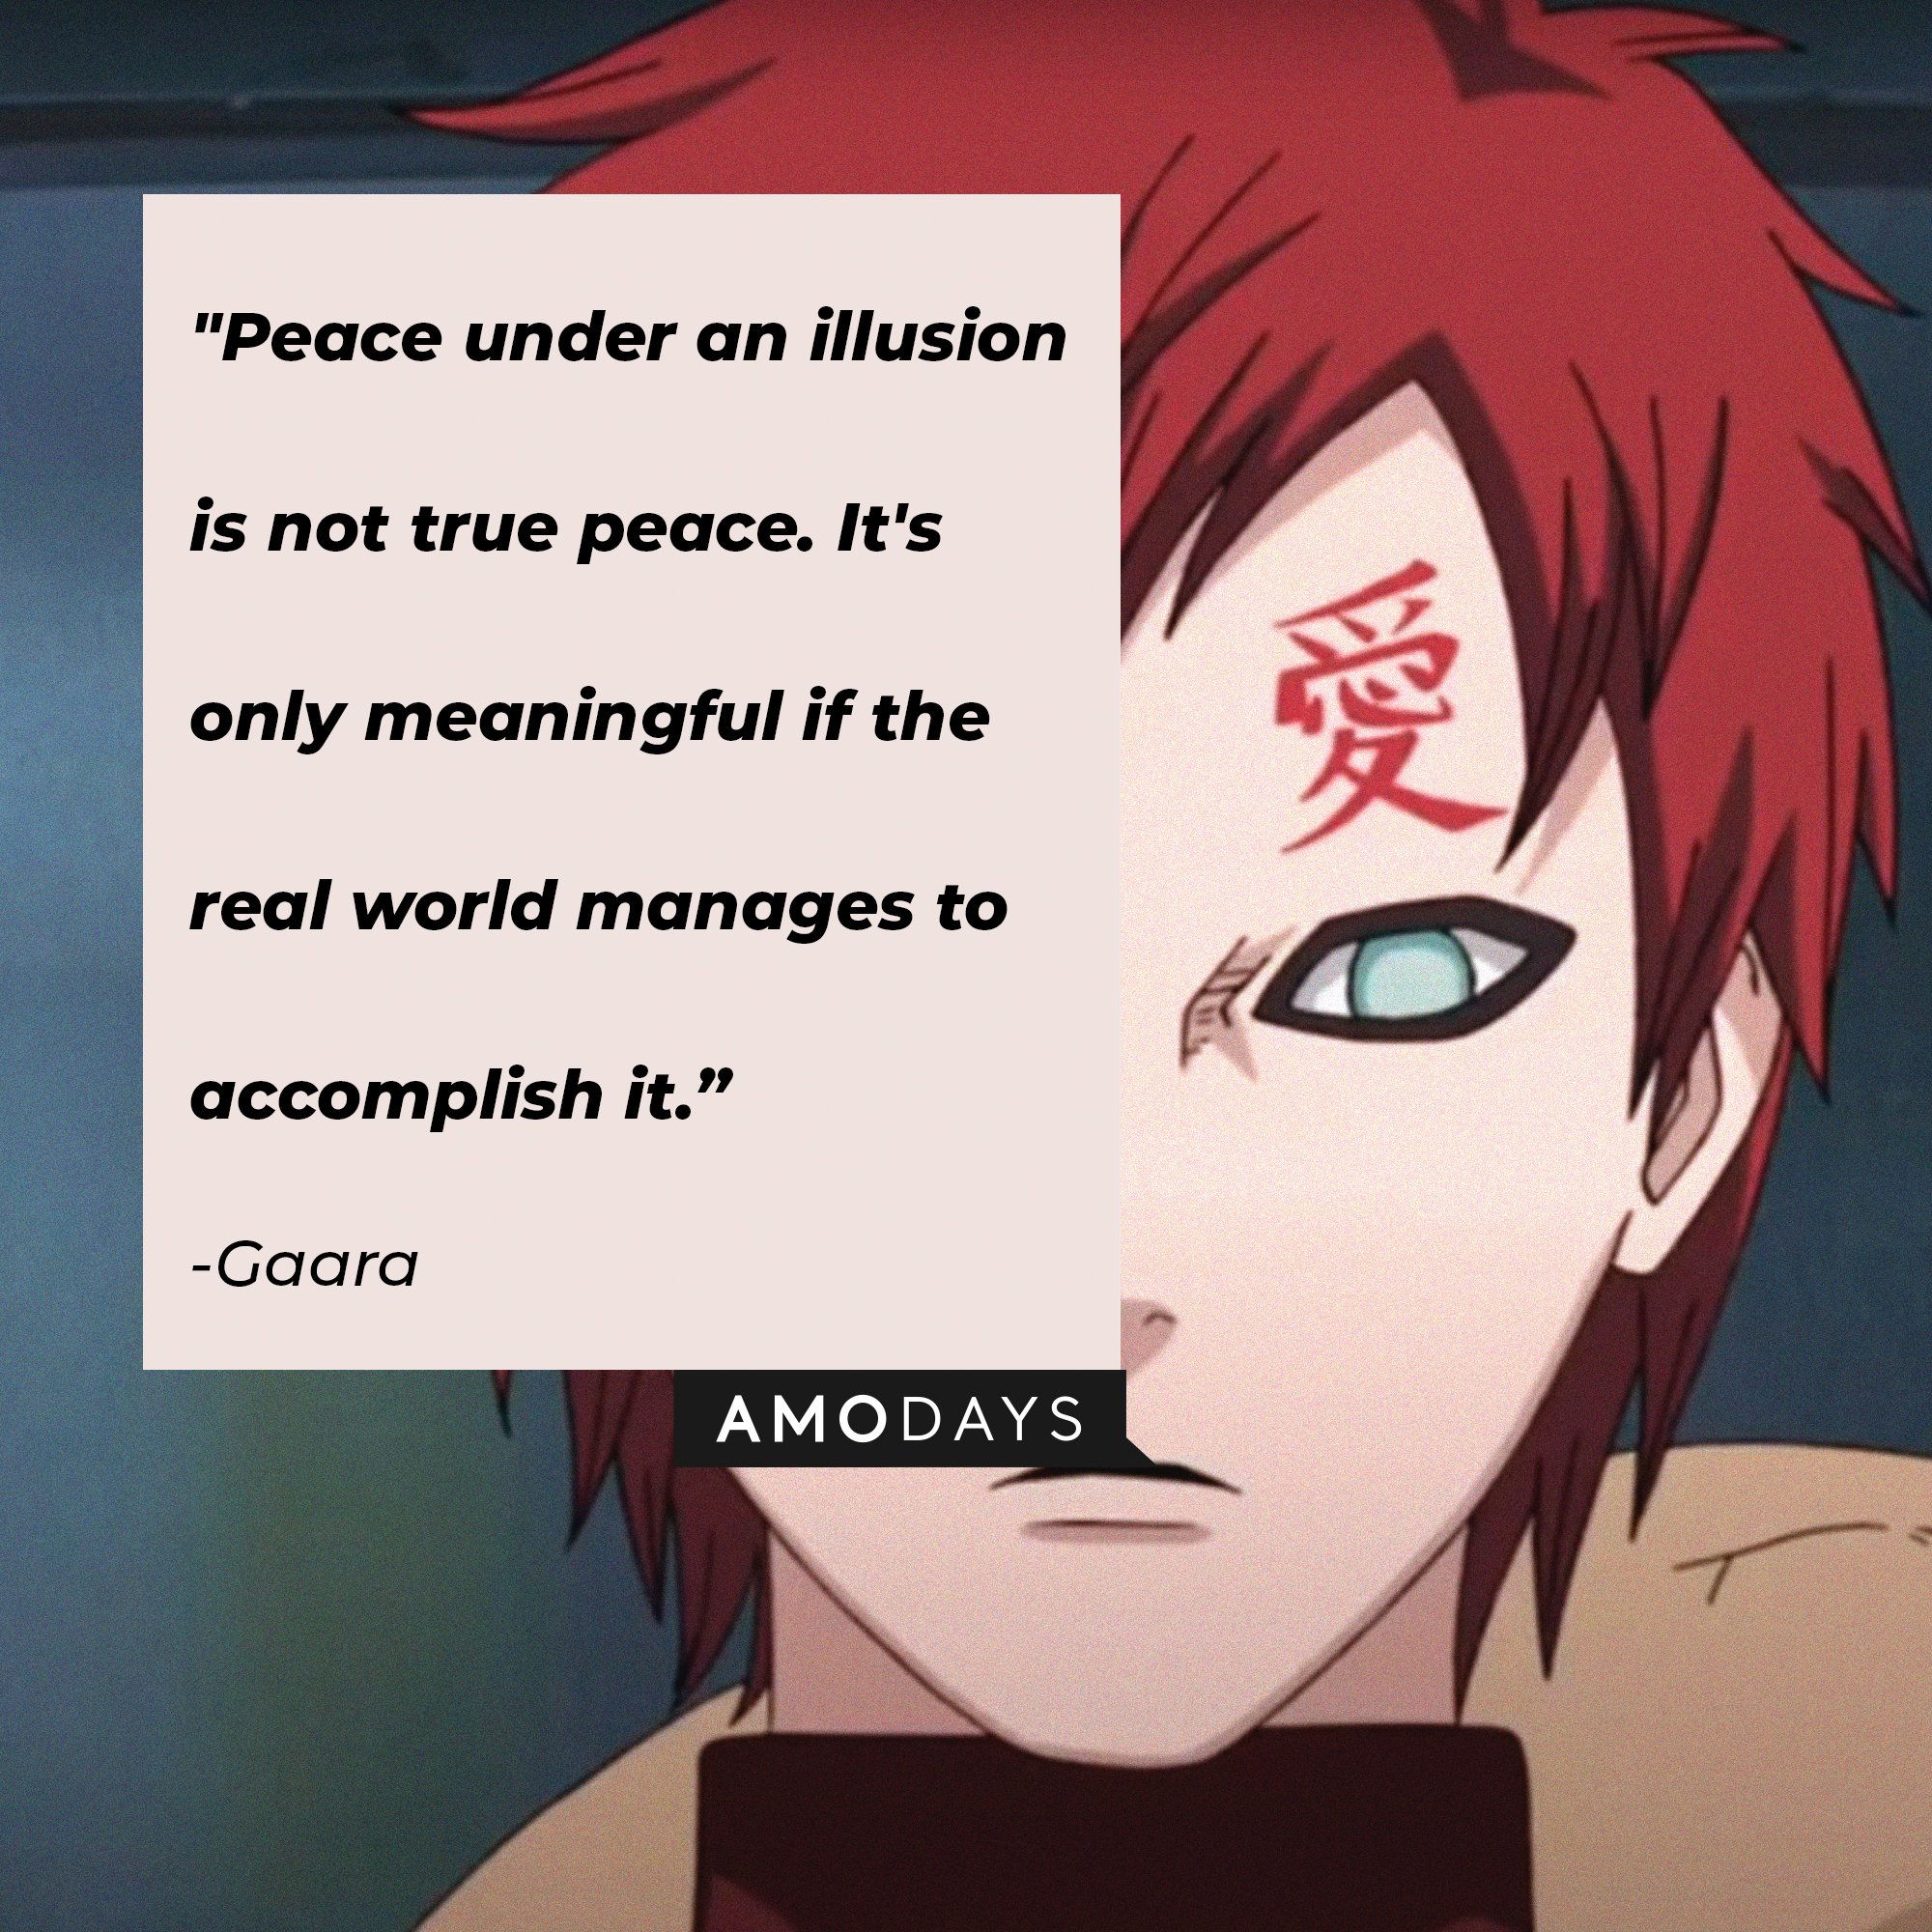 Gaara’s quote: "Peace under an illusion is not true peace. It's only meaningful if the real world manages to accomplish it." | Image: AmoDay s